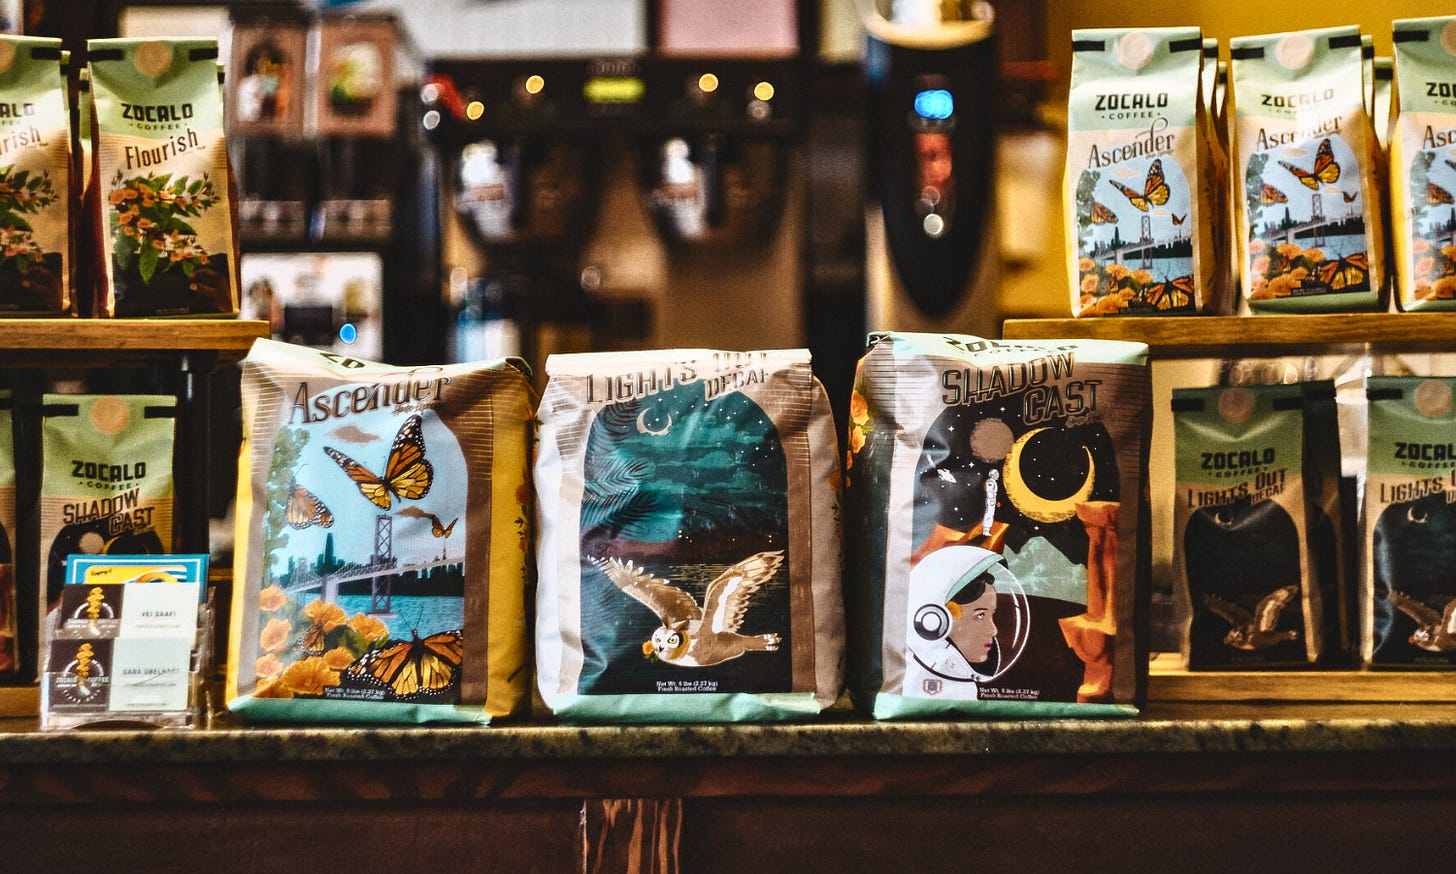 A shelf filled with elaborately illustrated coffee bags featuring illustrated artwork.